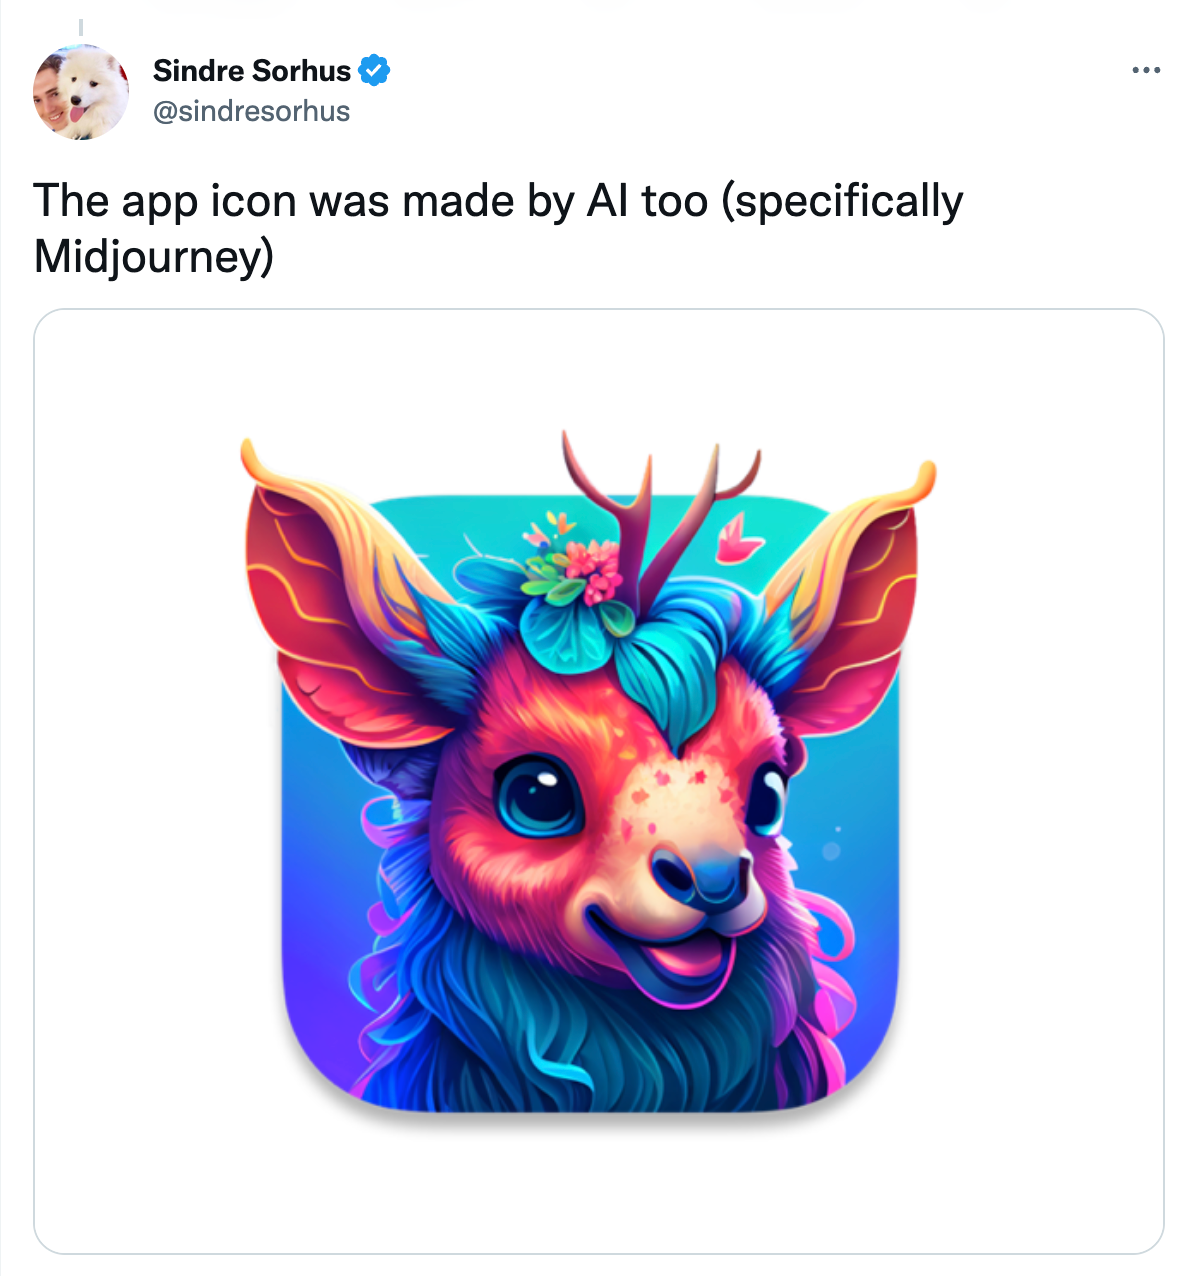 Screenshot of a tweet from @sindresorhus showing a fantasy, deer-like creature for a macOS app icon made with AI.